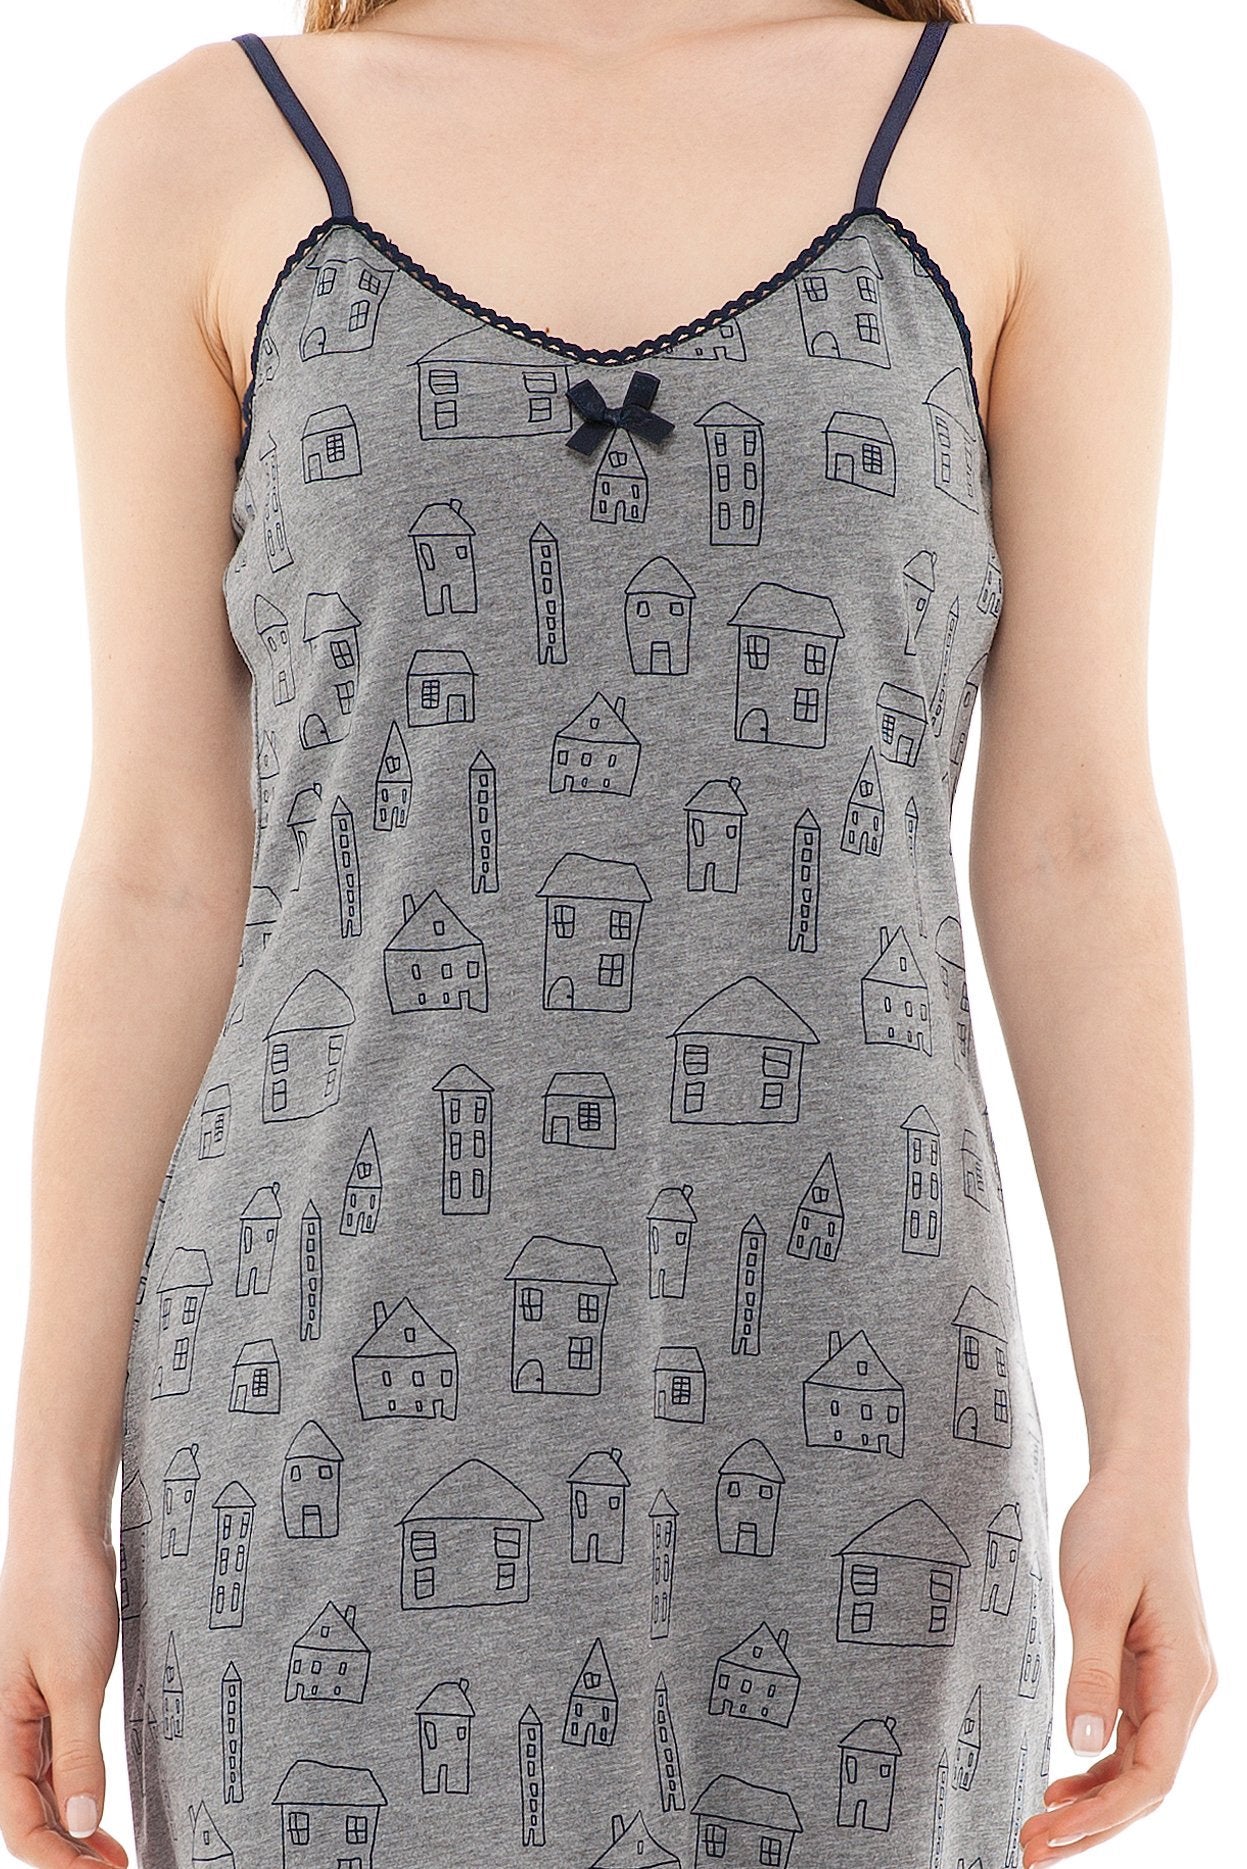 chassca nightdress with house print - Breakmood